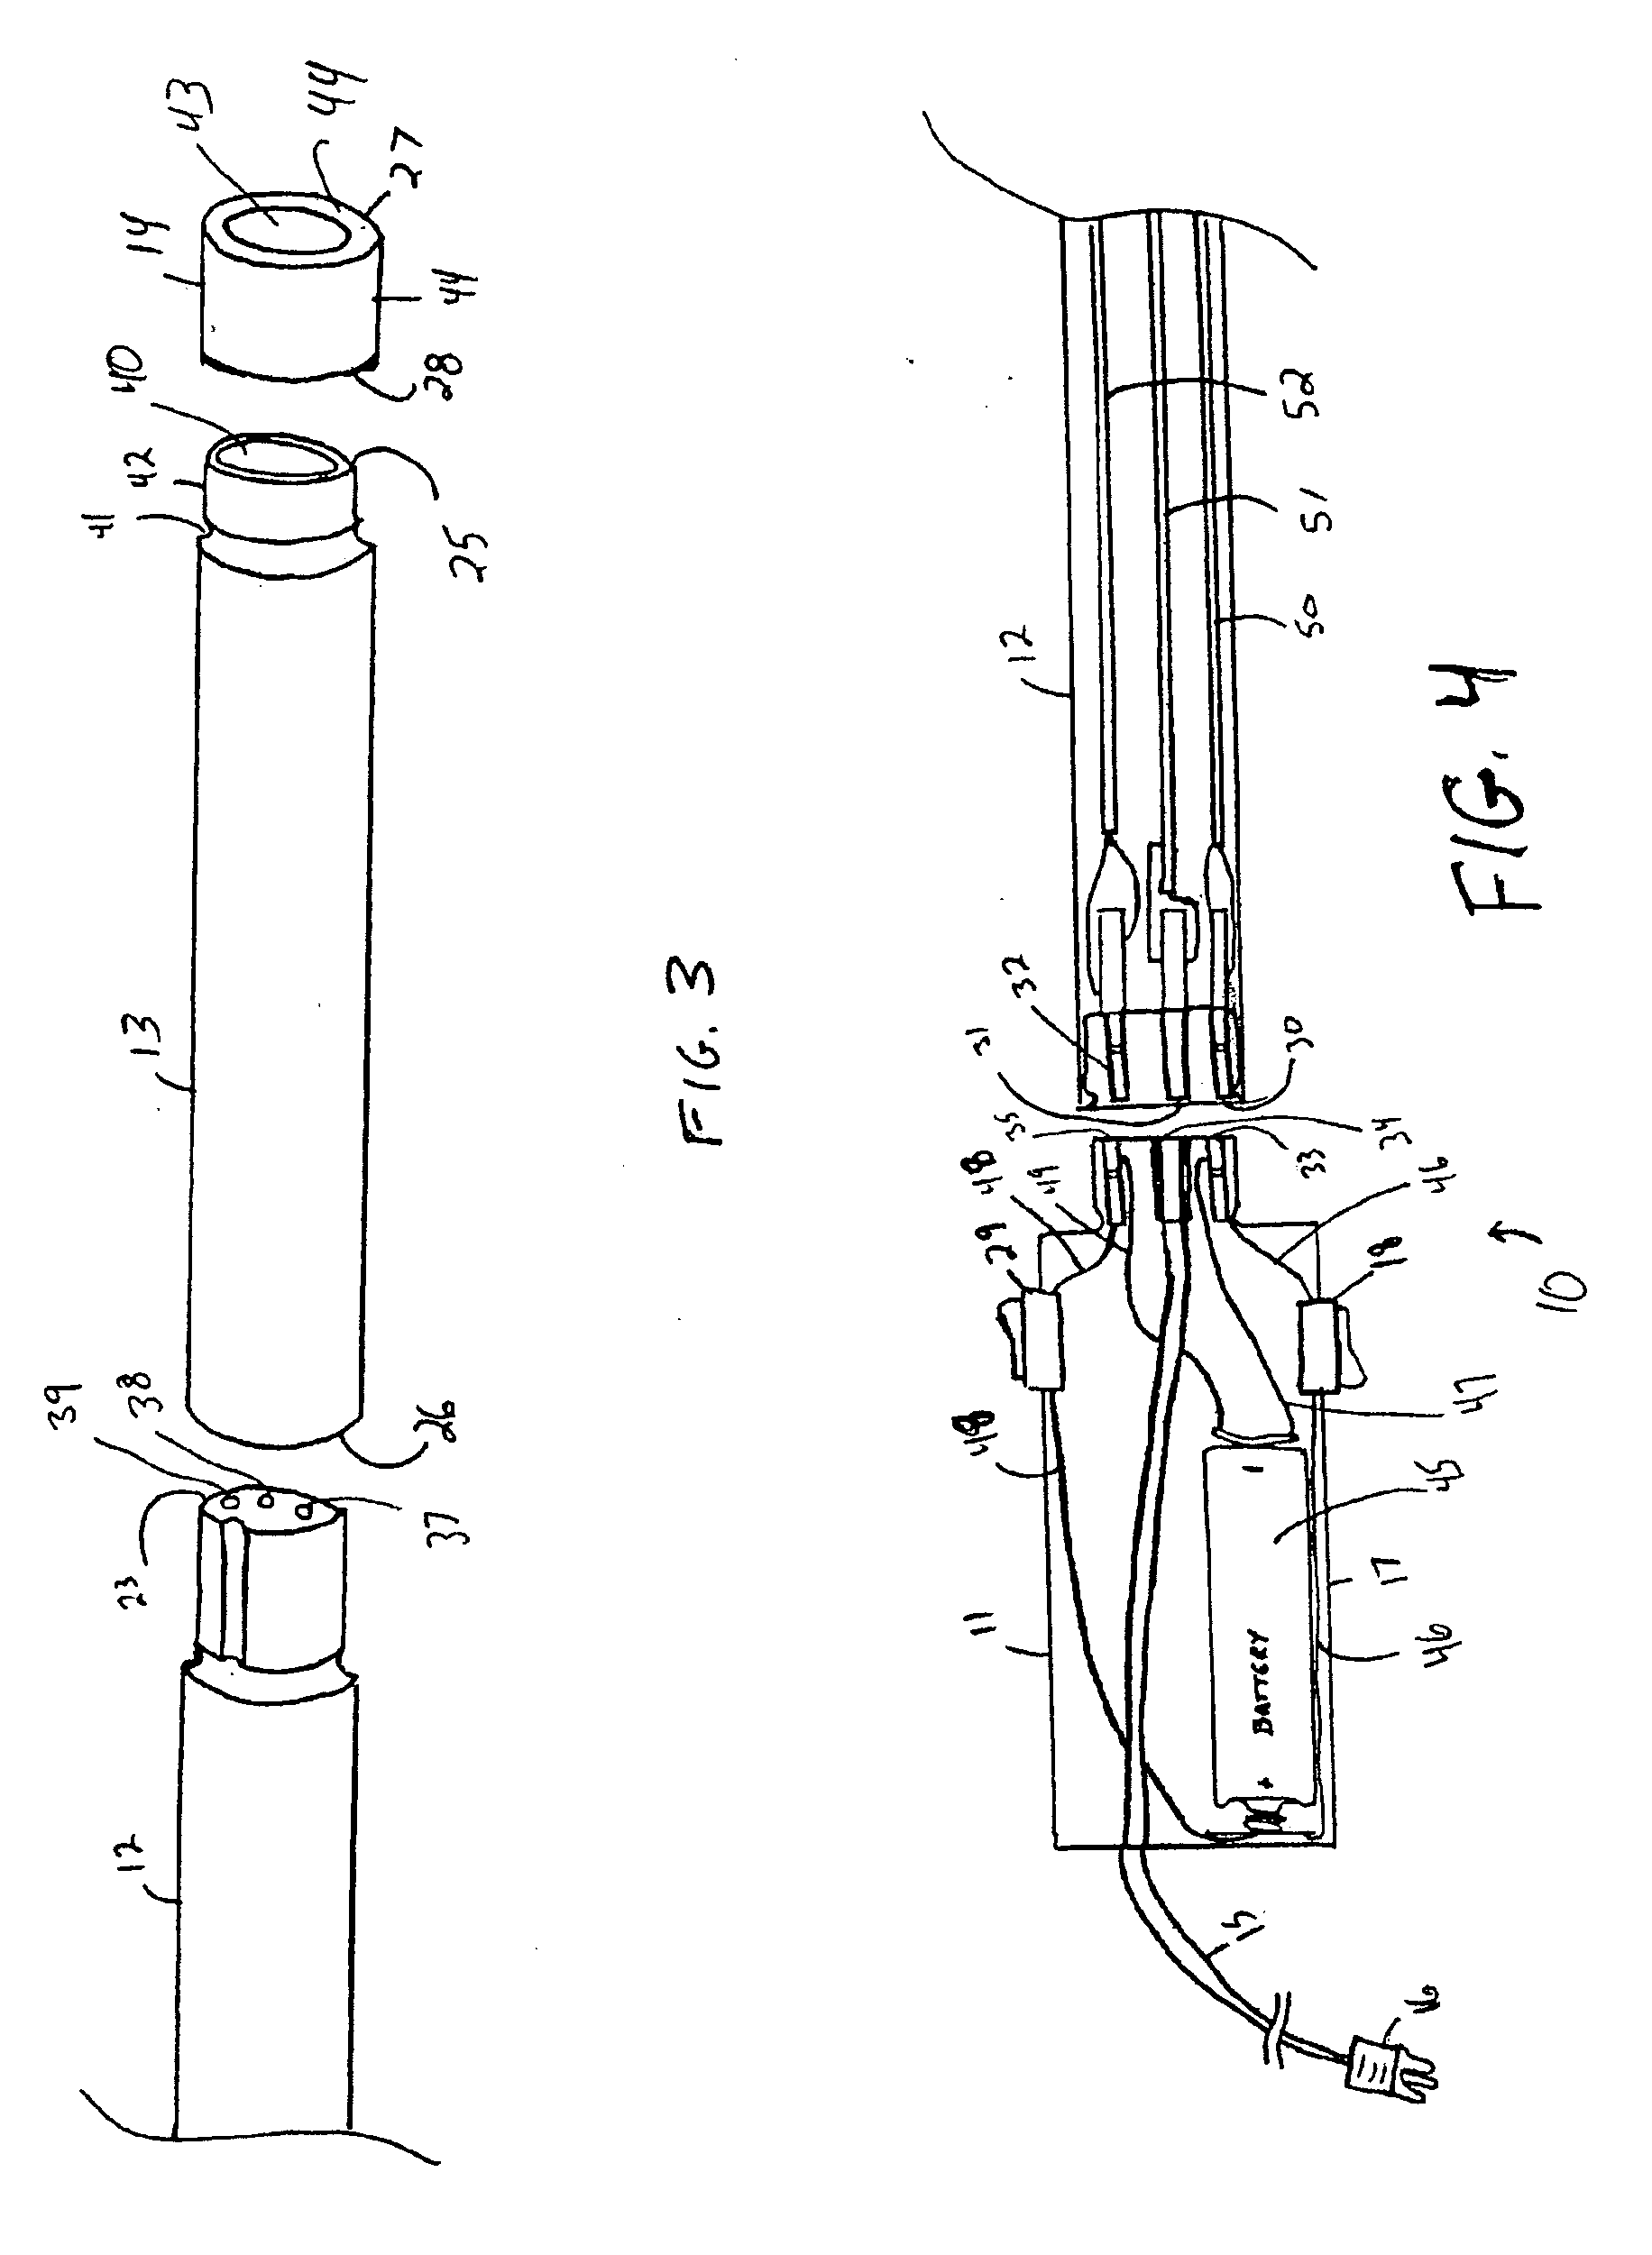 Modular visualization stylet apparatus and methods of use